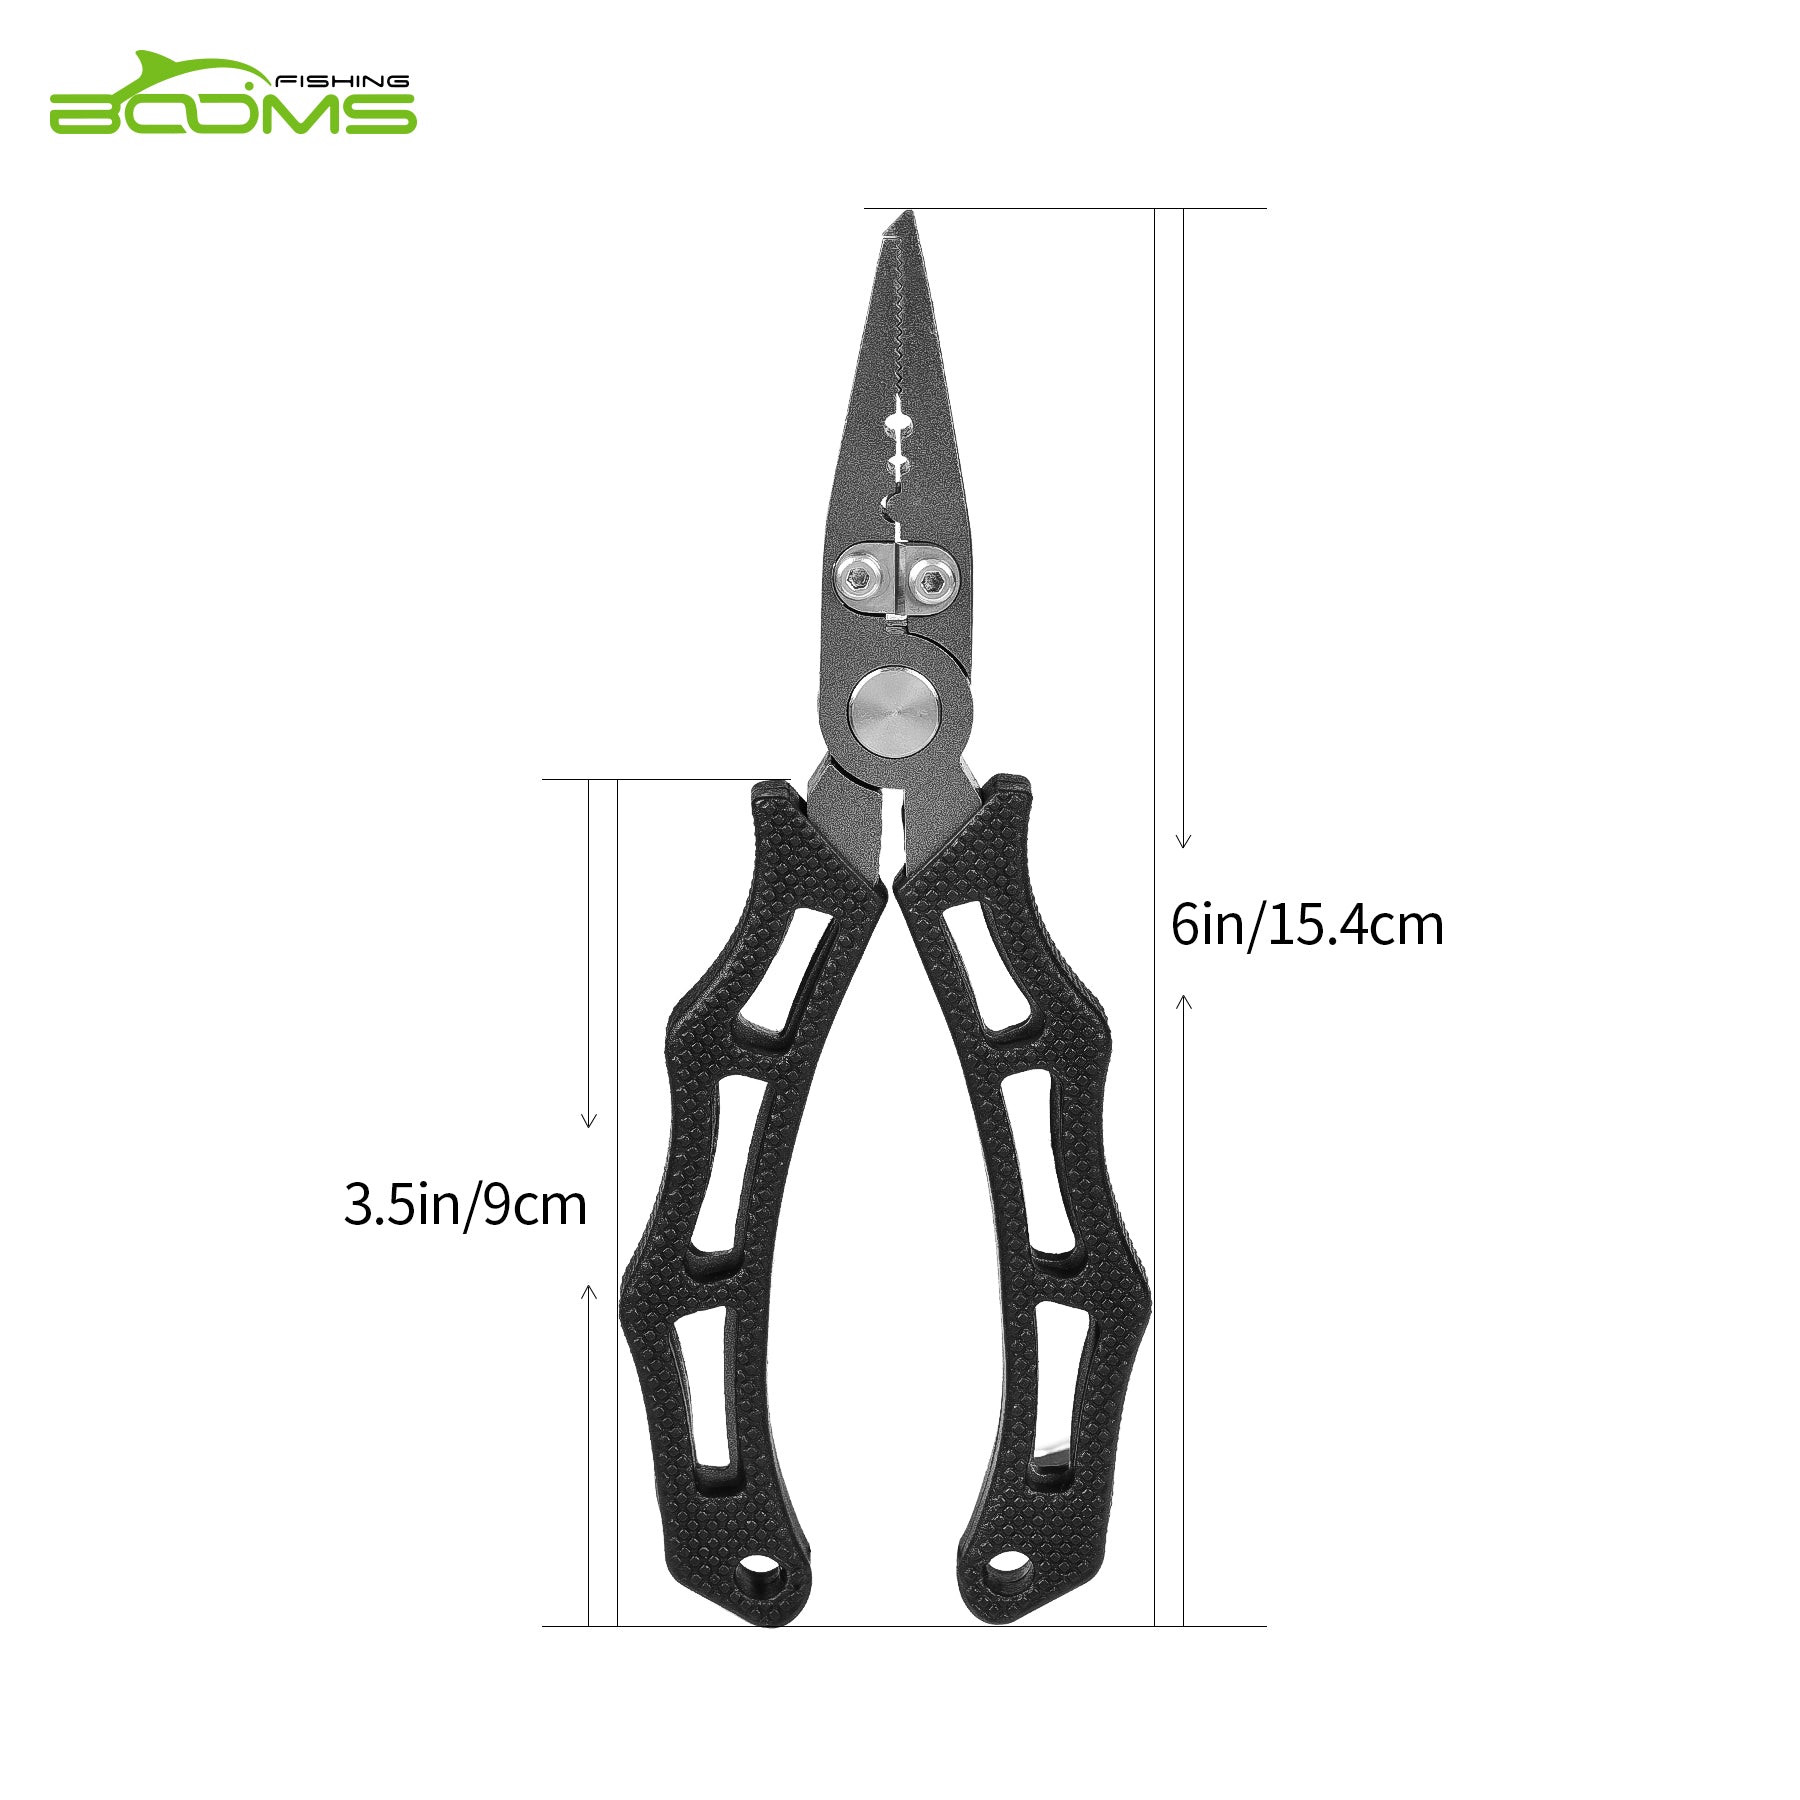 F07 Fishing Pliers Stainless Steel Construction Small Size – Booms Fishing  Official